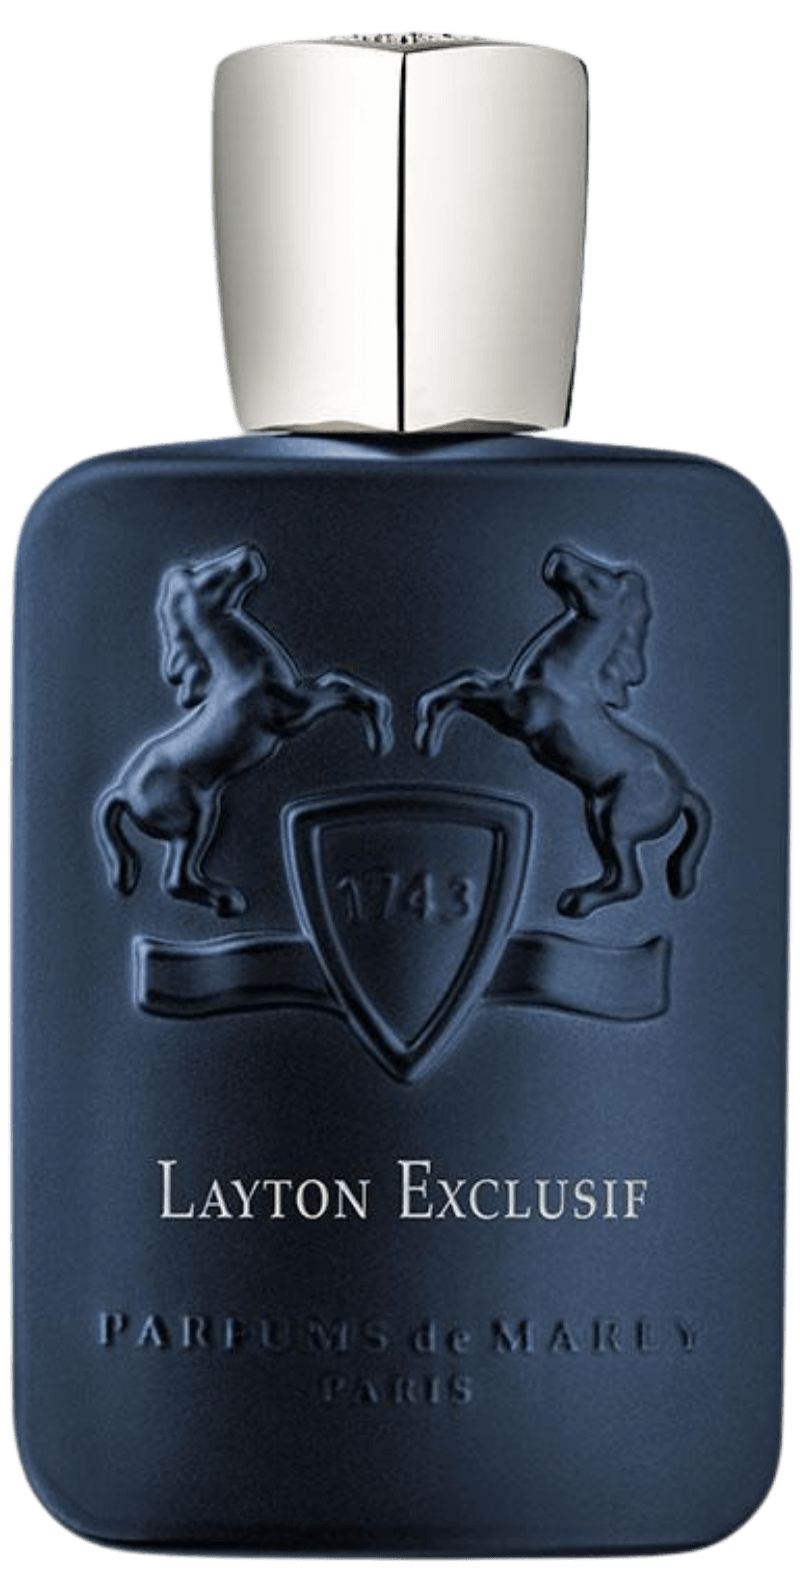 's Parfums de Marly Layton Exclusif - Bellini's Skin and Parfumerie 